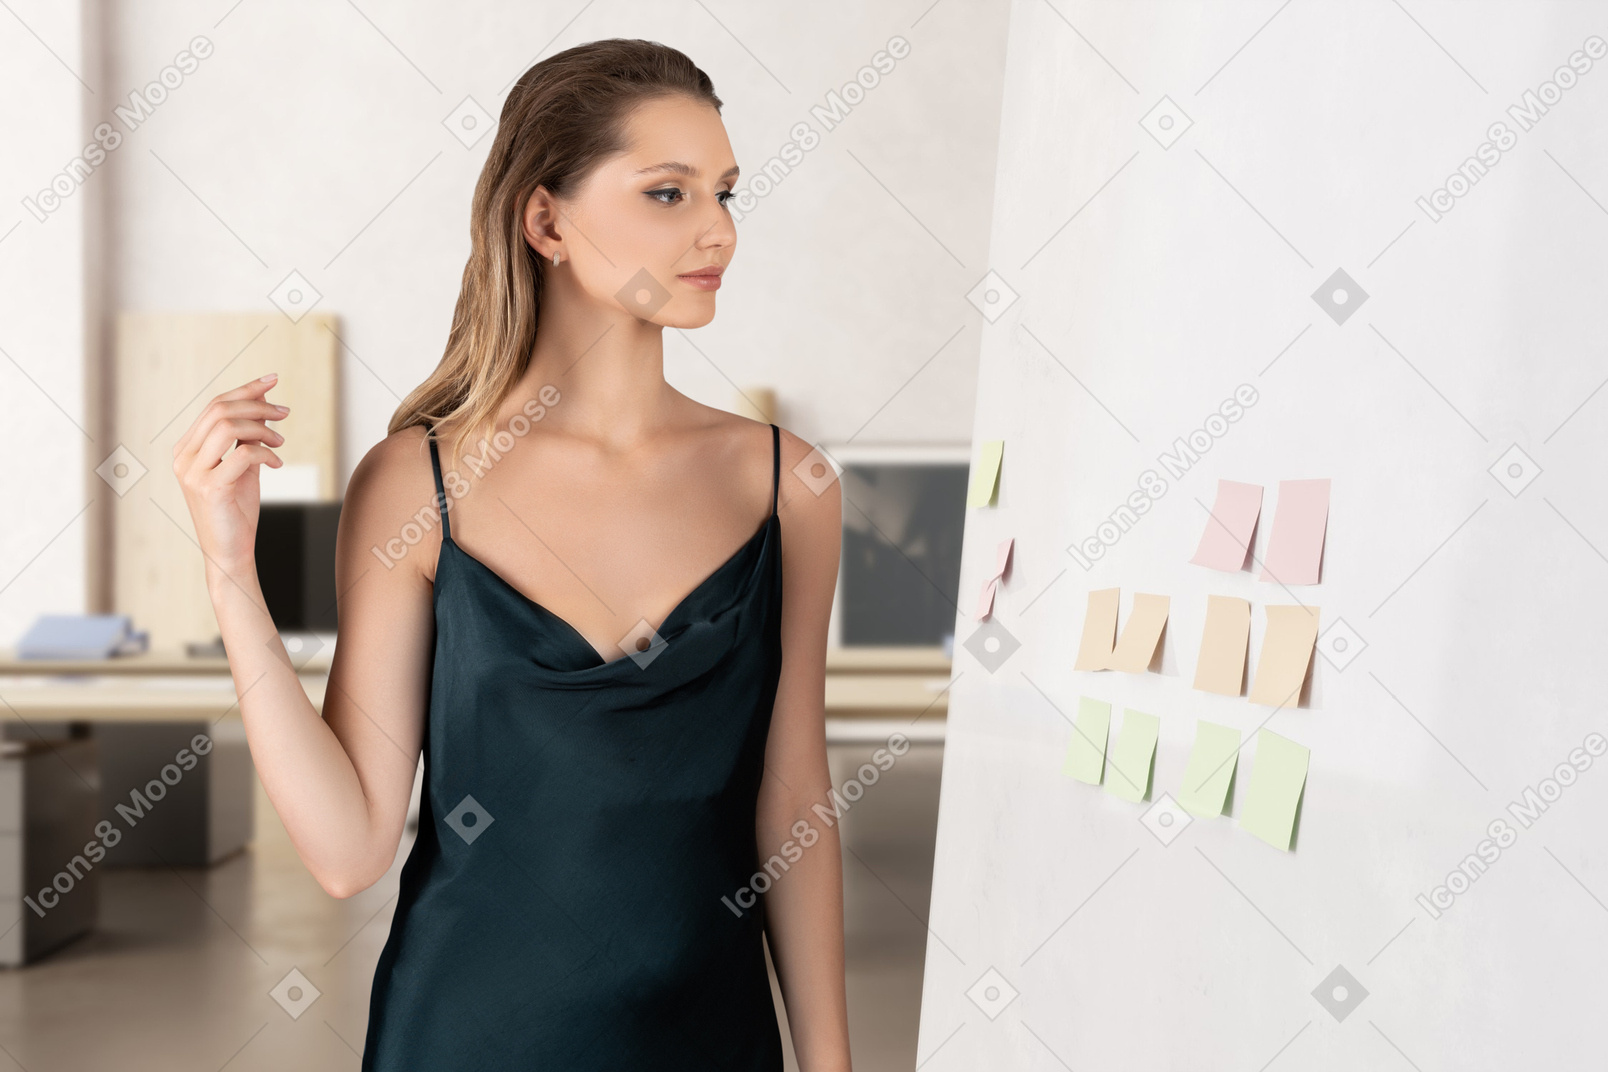 A woman standing next to a white wall with sticky notes